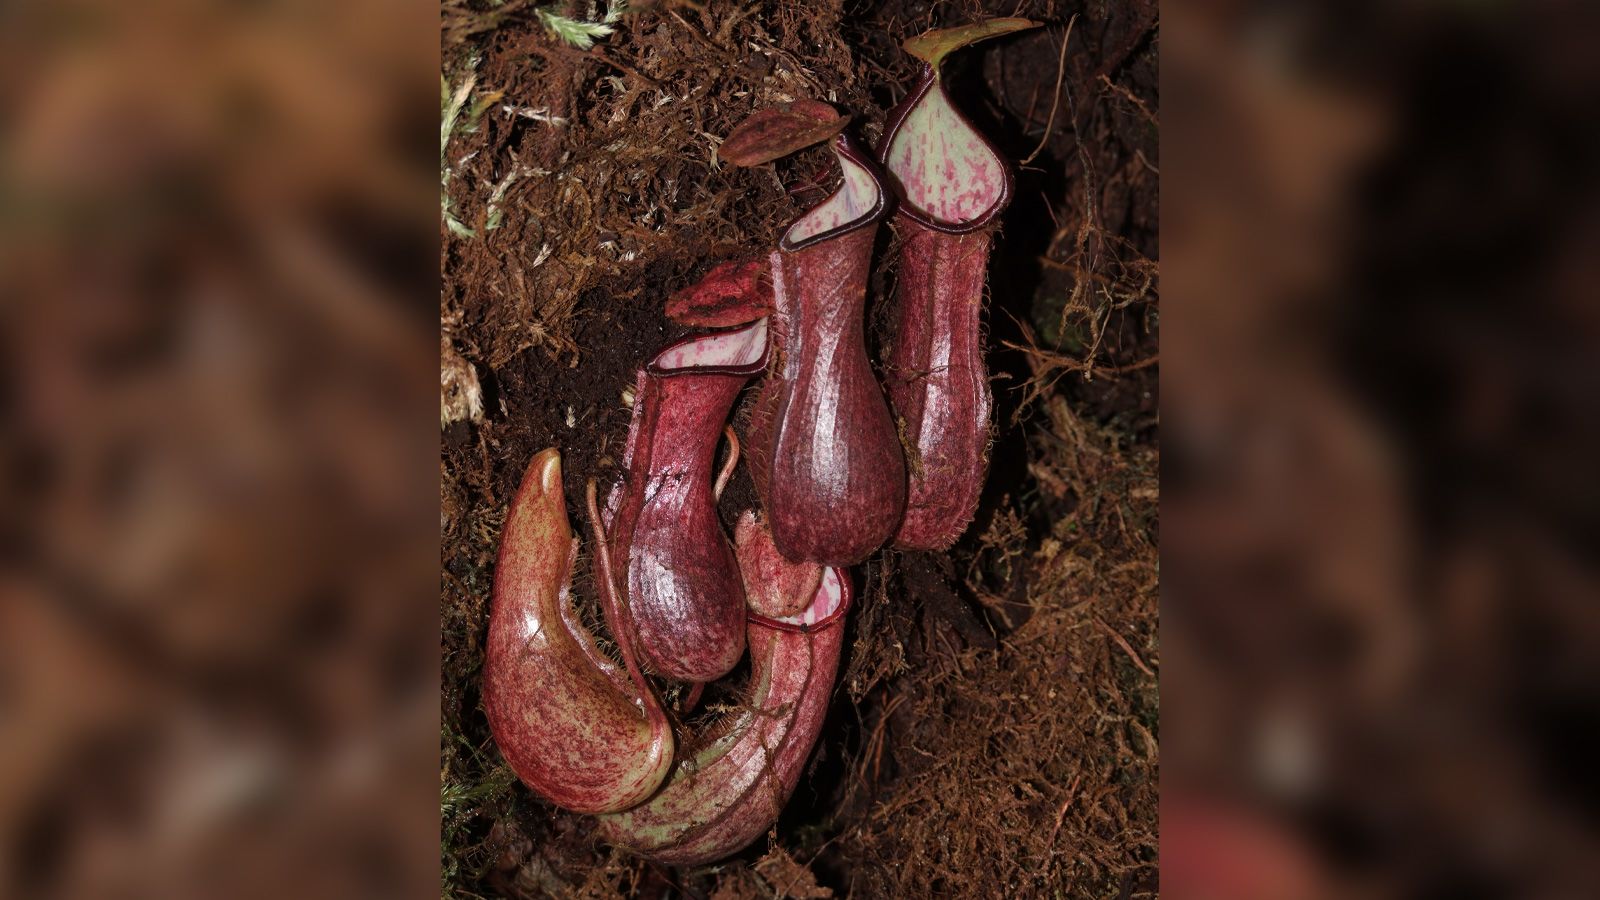 Carnivorous plant that traps prey is the 1st of its kind | CNN